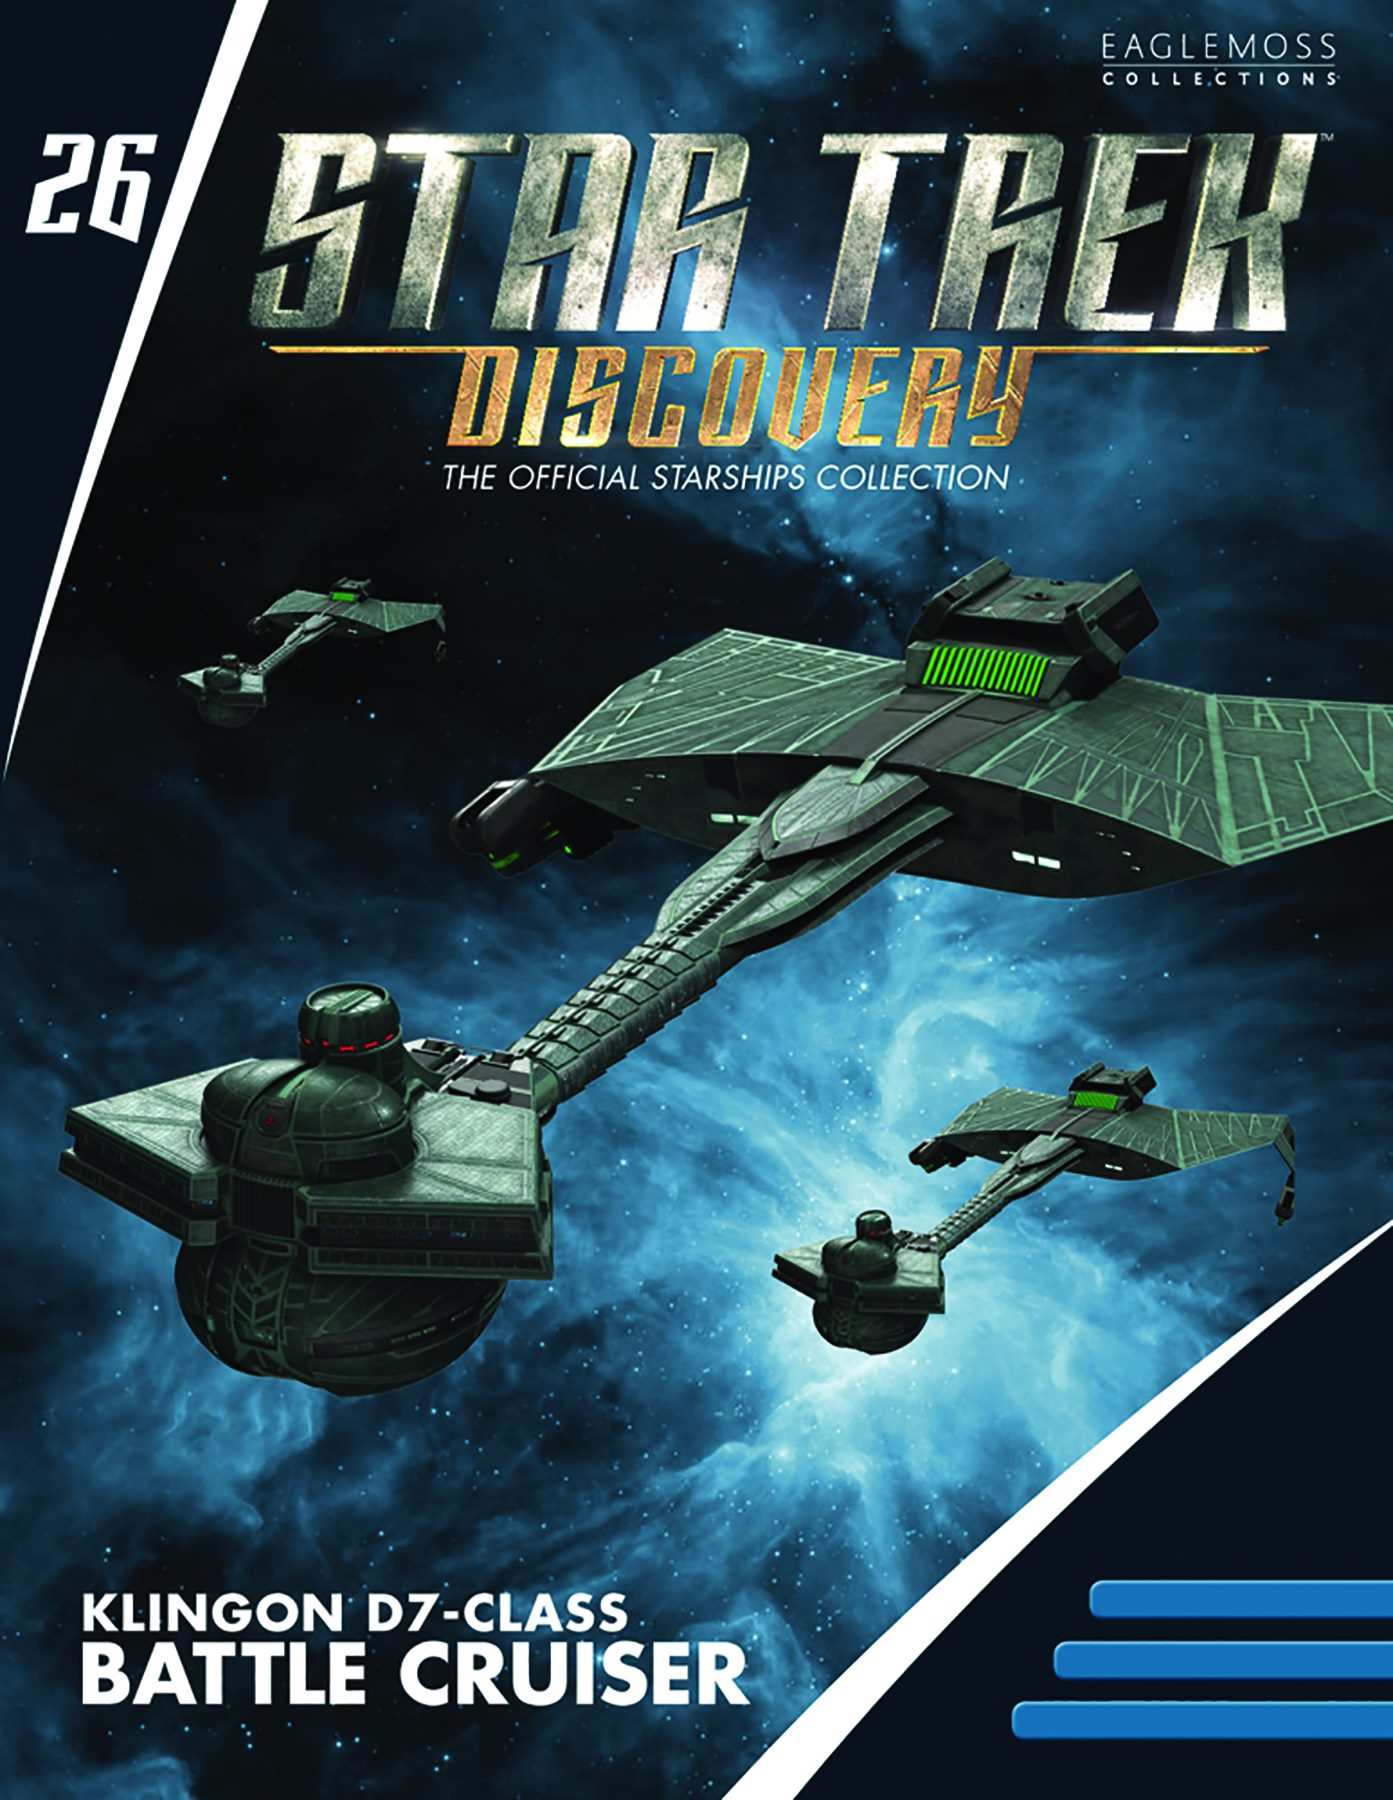 Star Trek: Discovery- The Official Starships Collection #26.jpg